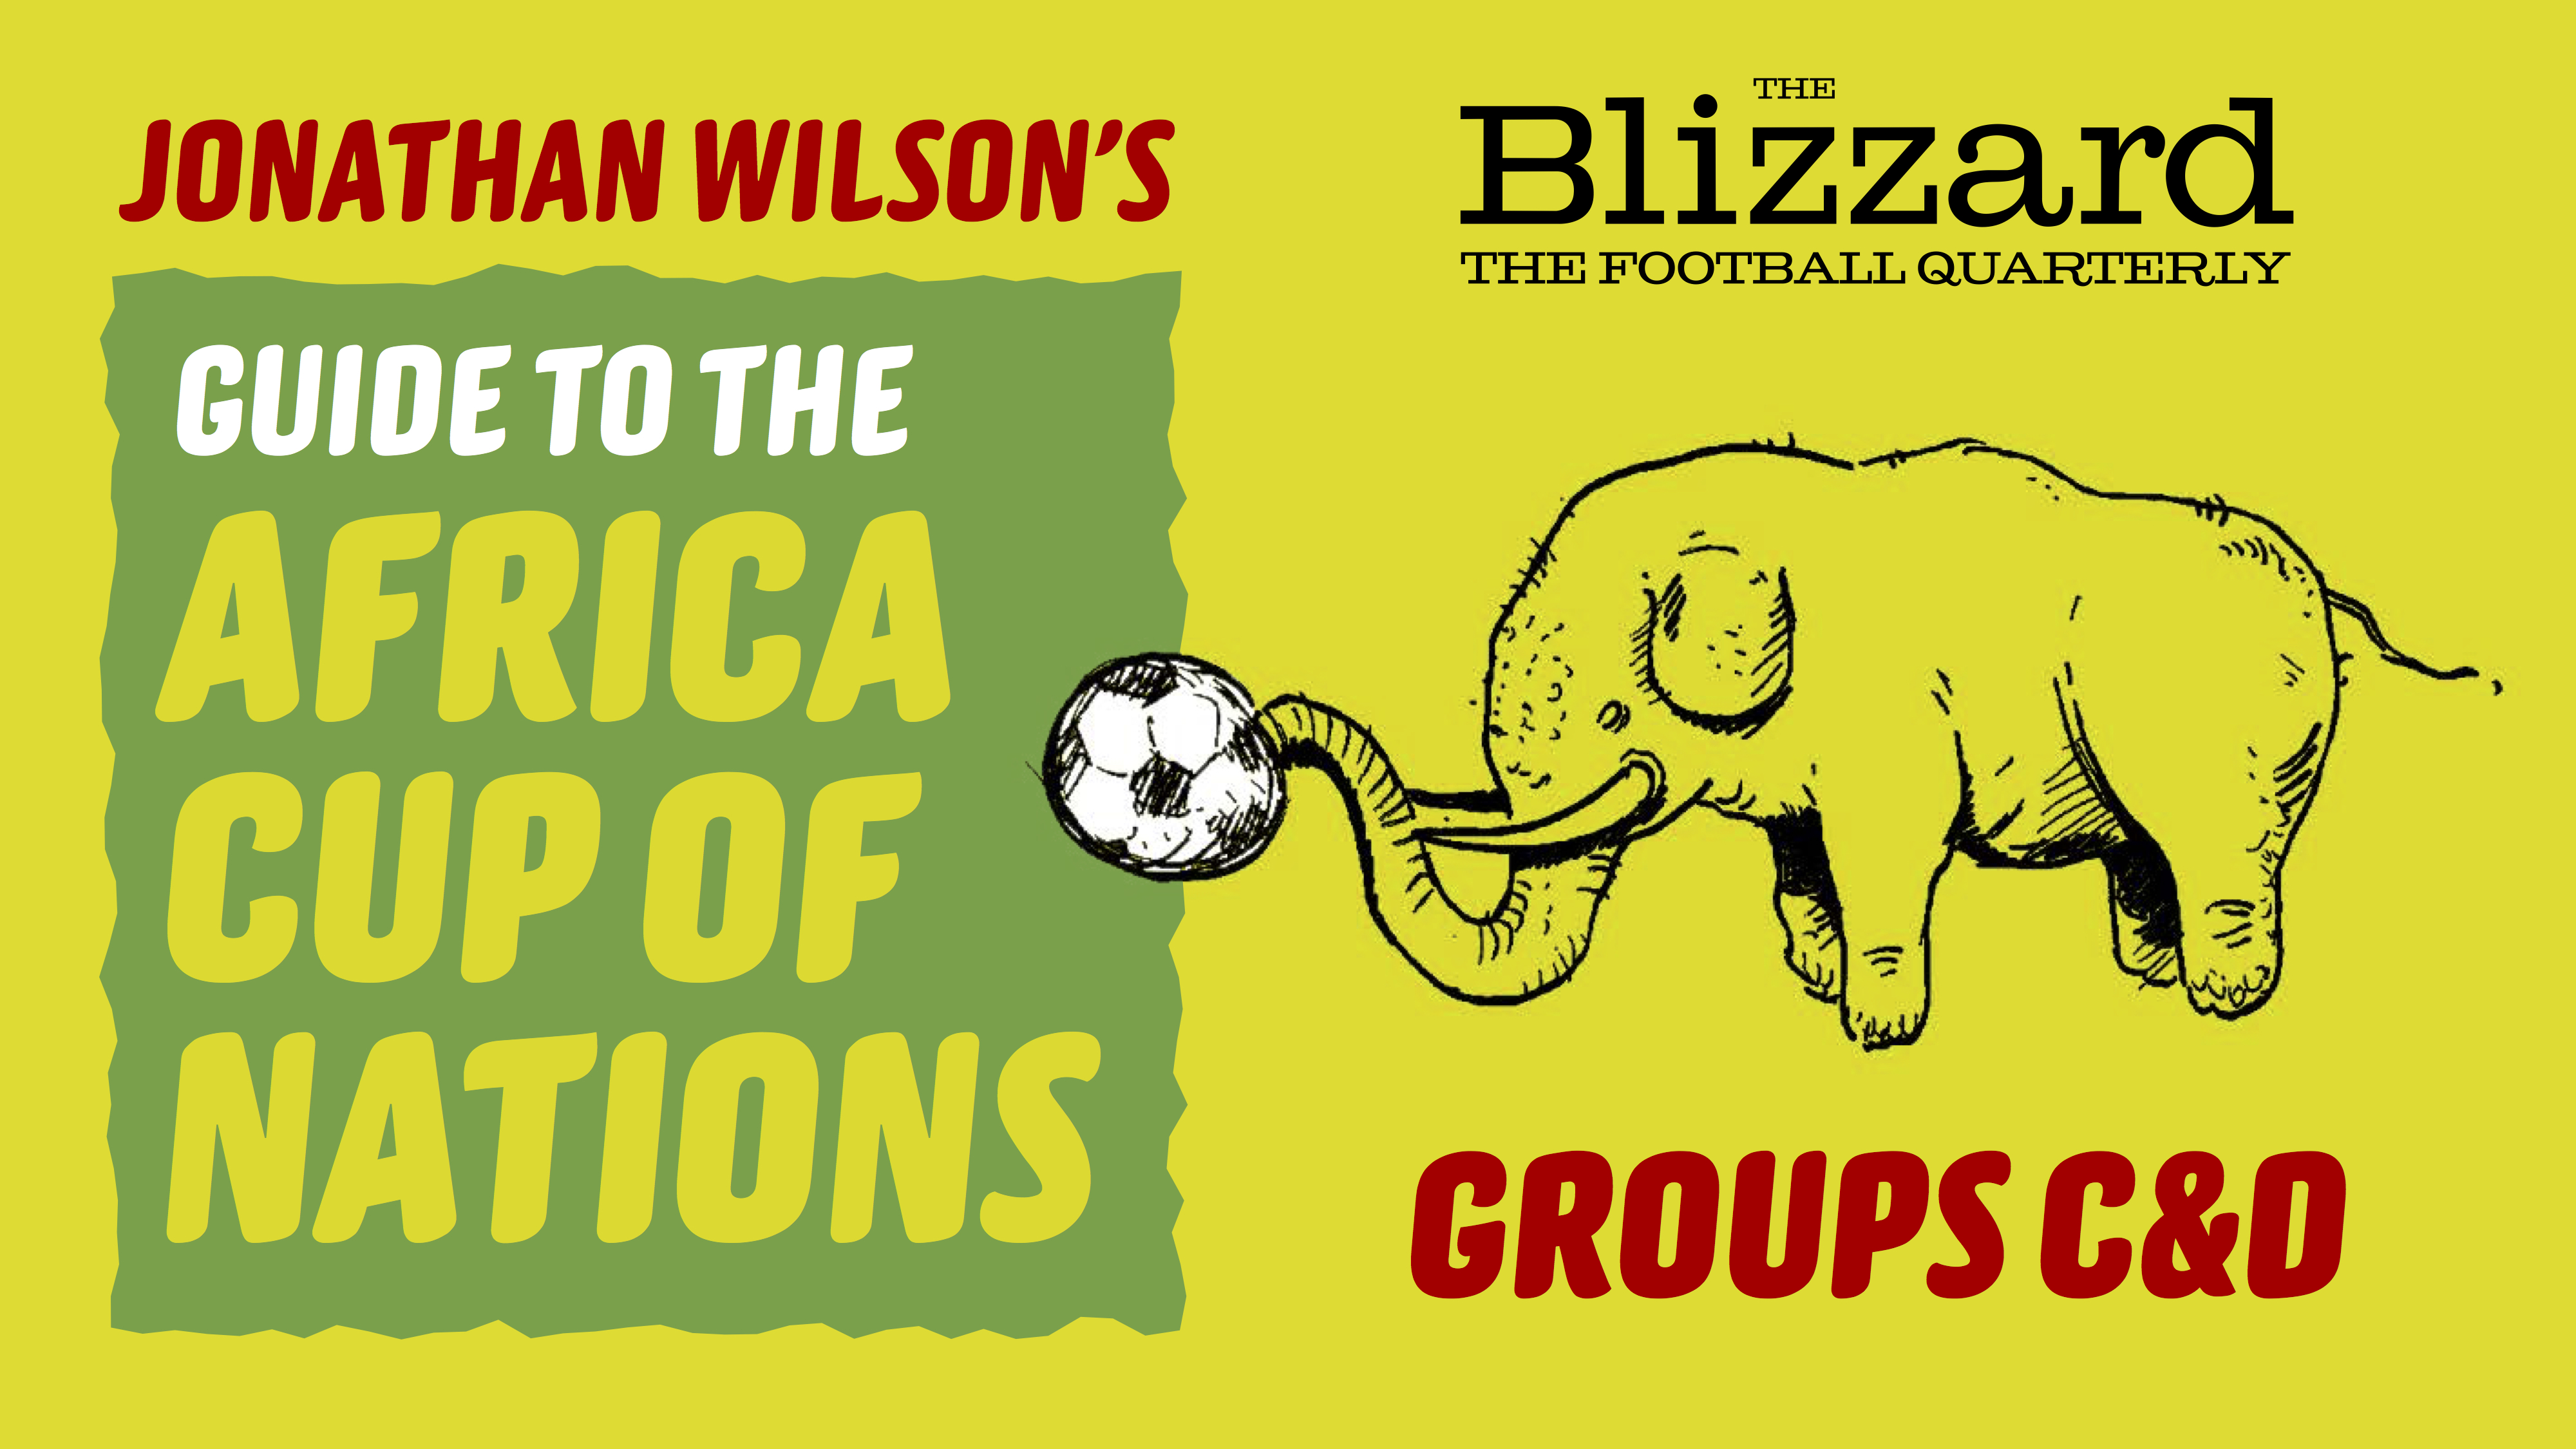 Groups C & D – Jonathan Wilson’s Guide to Afcon 2019